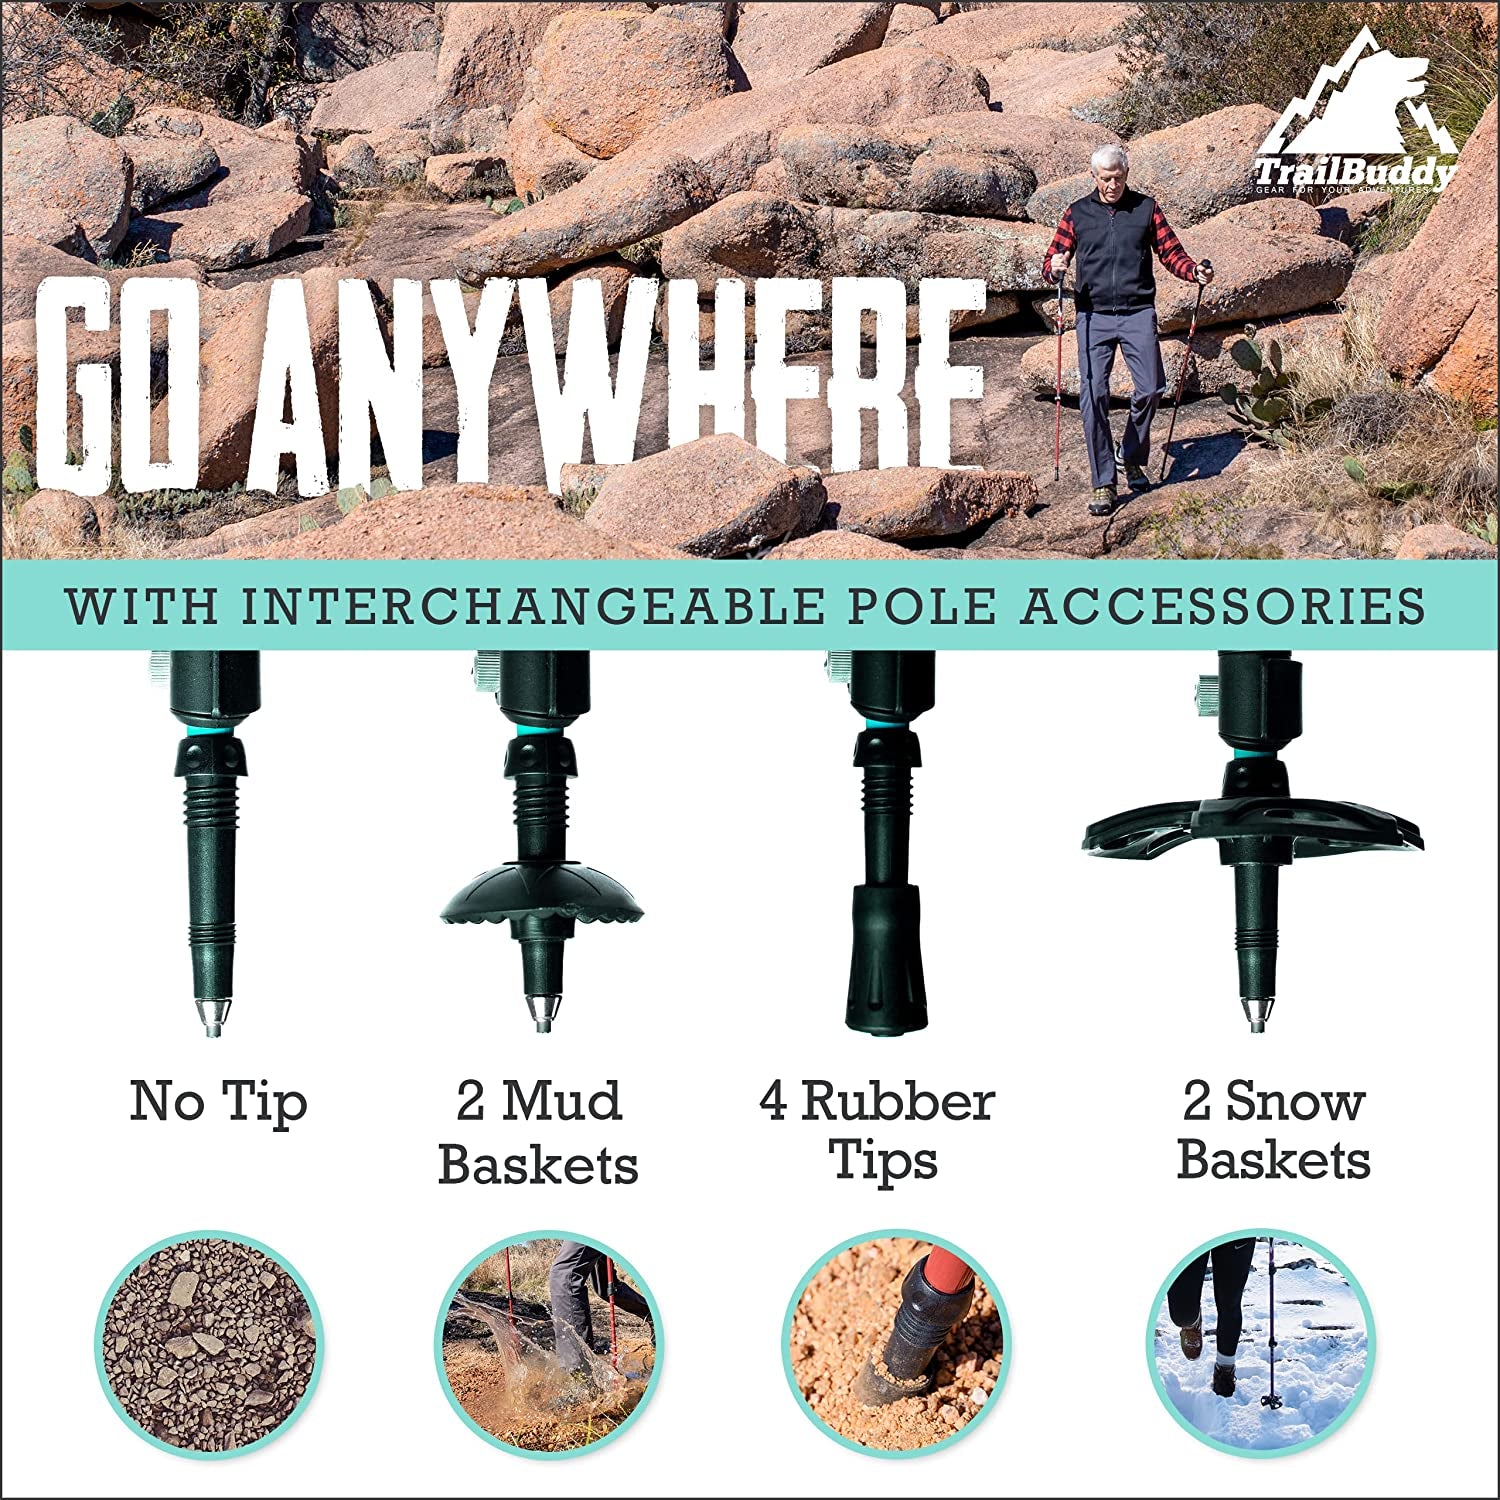 Trekking Poles - Lightweight, Collapsible Hiking Poles for Backpacking Gear - Pair of 2 Walking Sticks for Hiking, 7075 Aluminum with Cork Grip